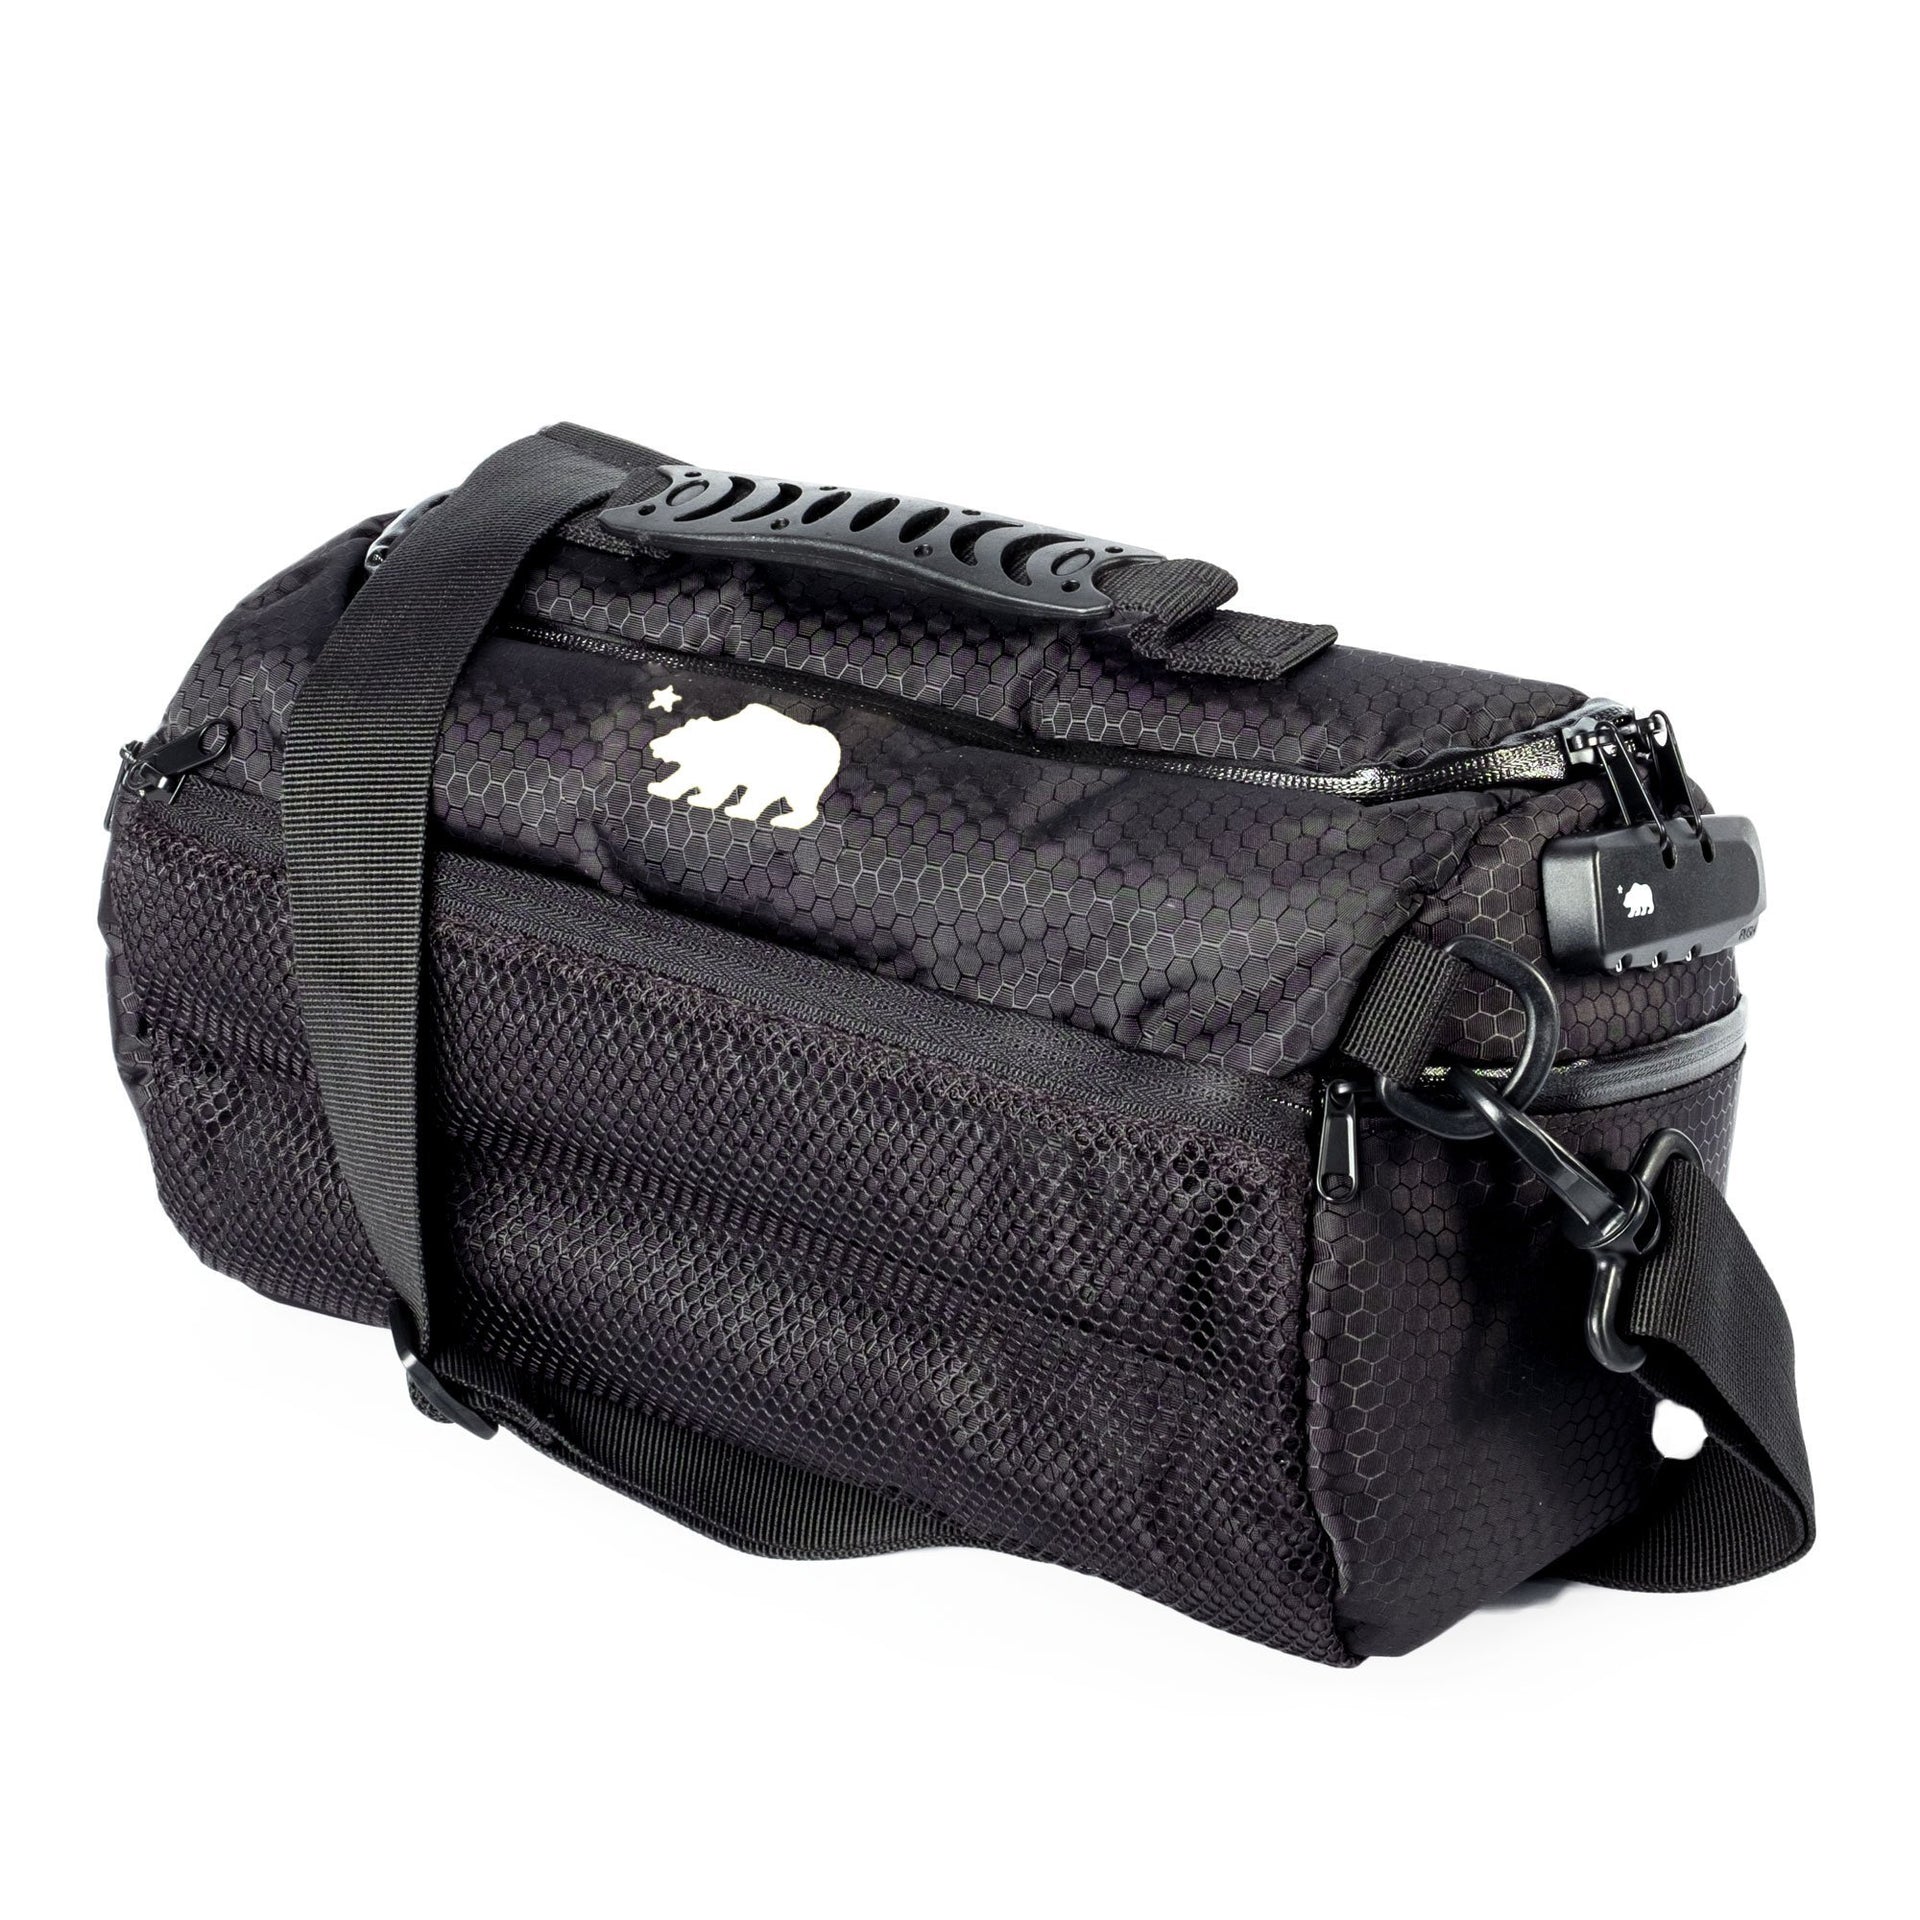 Cali Bags 12in Smell Proof Duffle w/Locking Zipper - 420 Science - The most trusted online smoke shop.